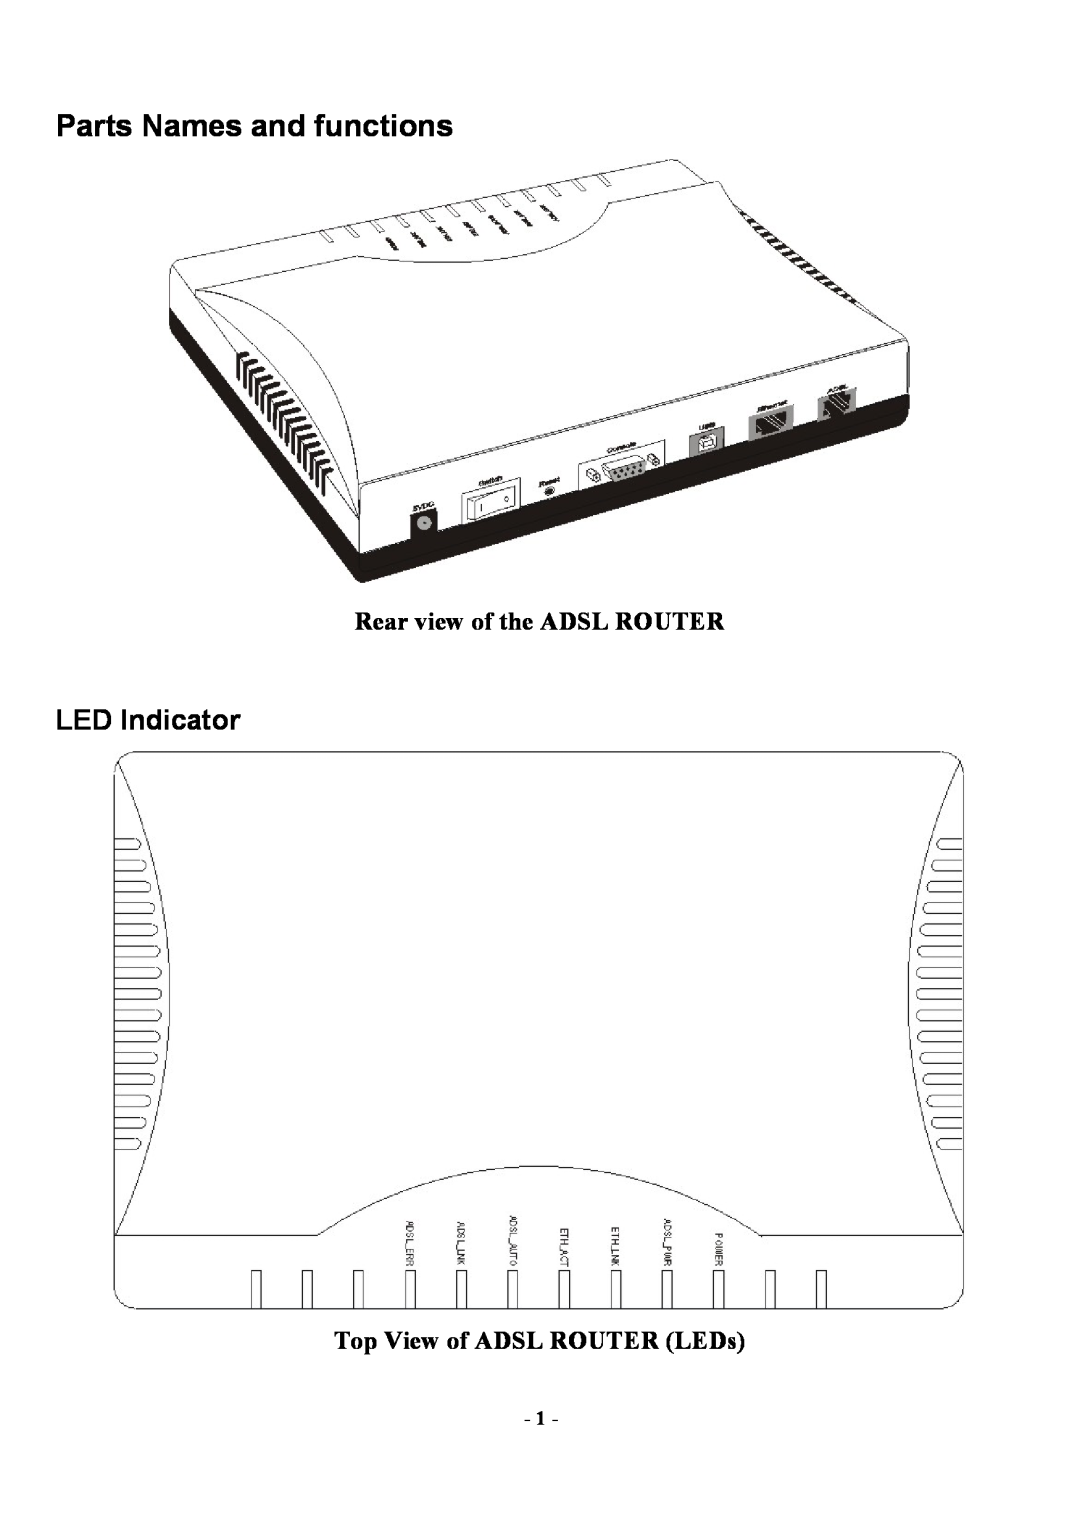 Abocom AR1000 manual Parts Names and functions, LED Indicator, Rear view of the ADSL ROUTER, Top View of ADSL ROUTER LEDs 